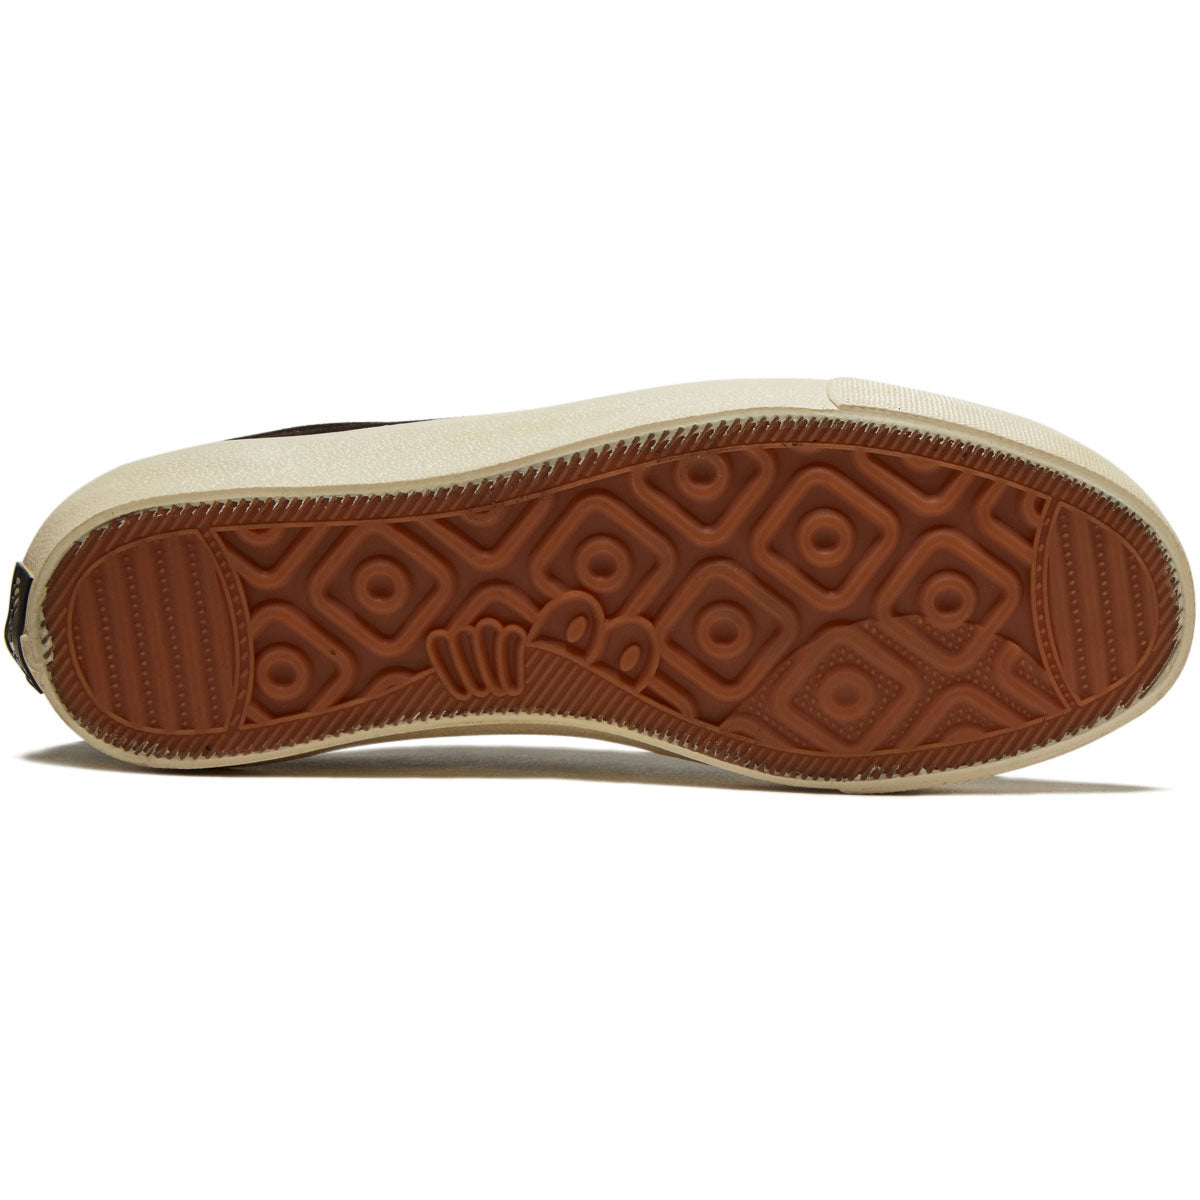 Last Resort AB VM003 Lo Suede Shoes - Coffee Bean/White image 4